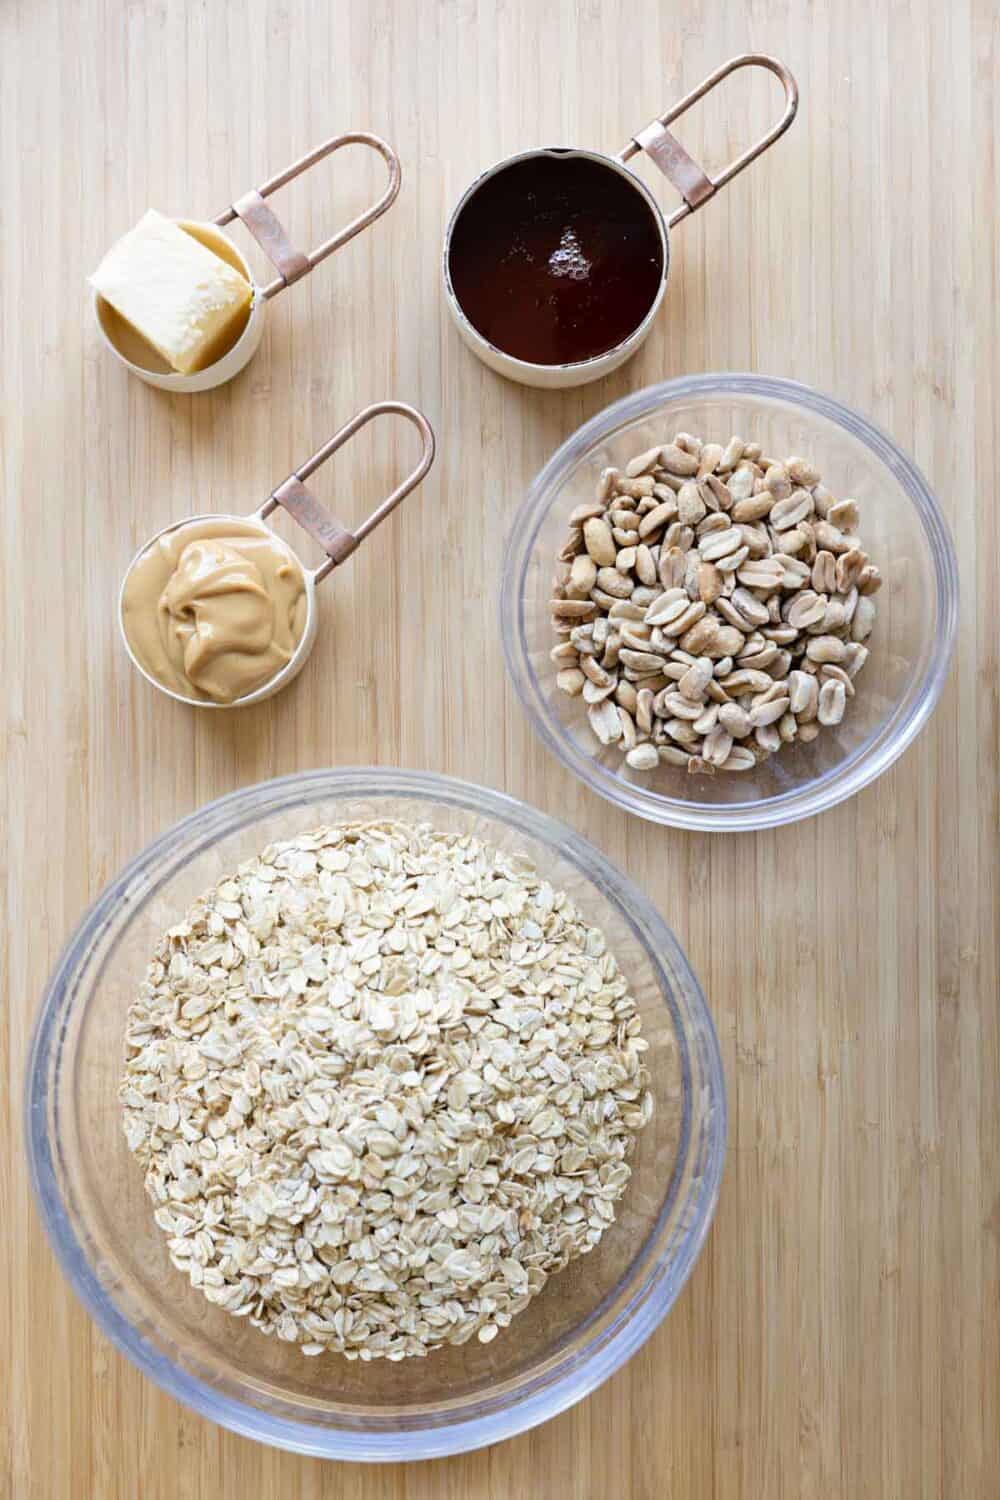 Ingredients for Peanut Butter Granola laid out on a kitchen counter.